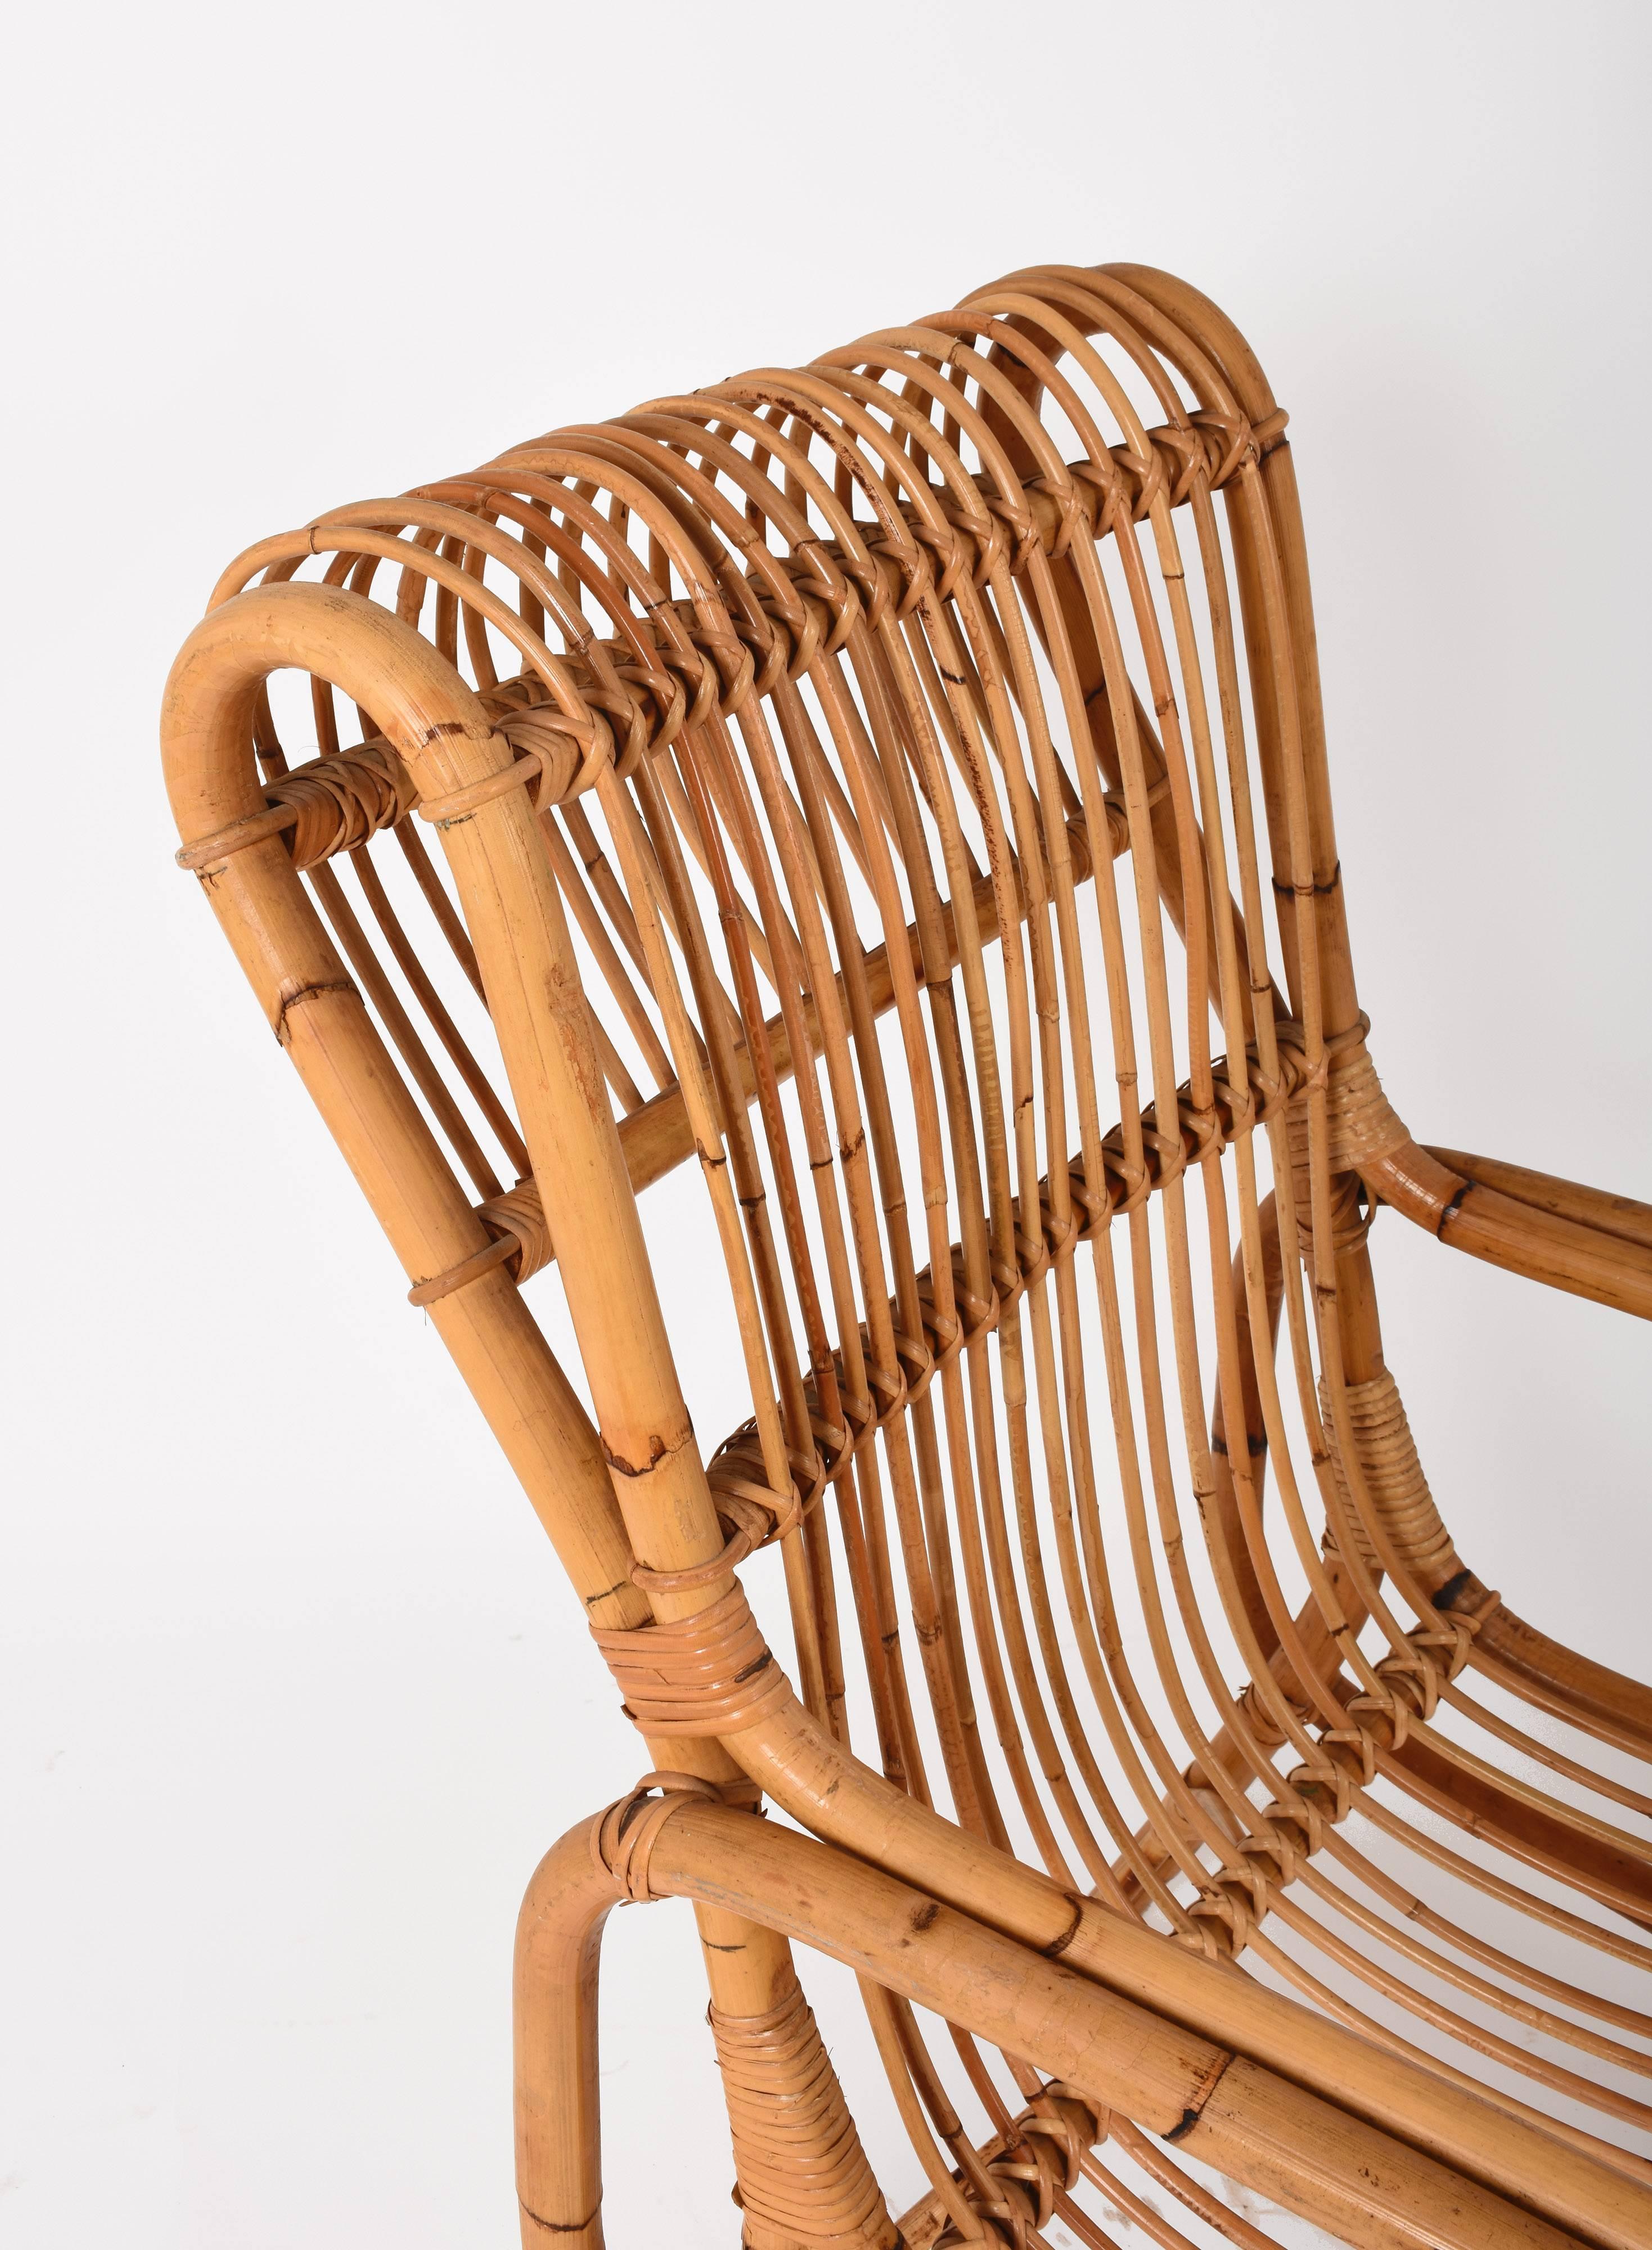 Midcentury French Riviera Rattan and Bamboo Italian Armchair, 1960s For Sale 3